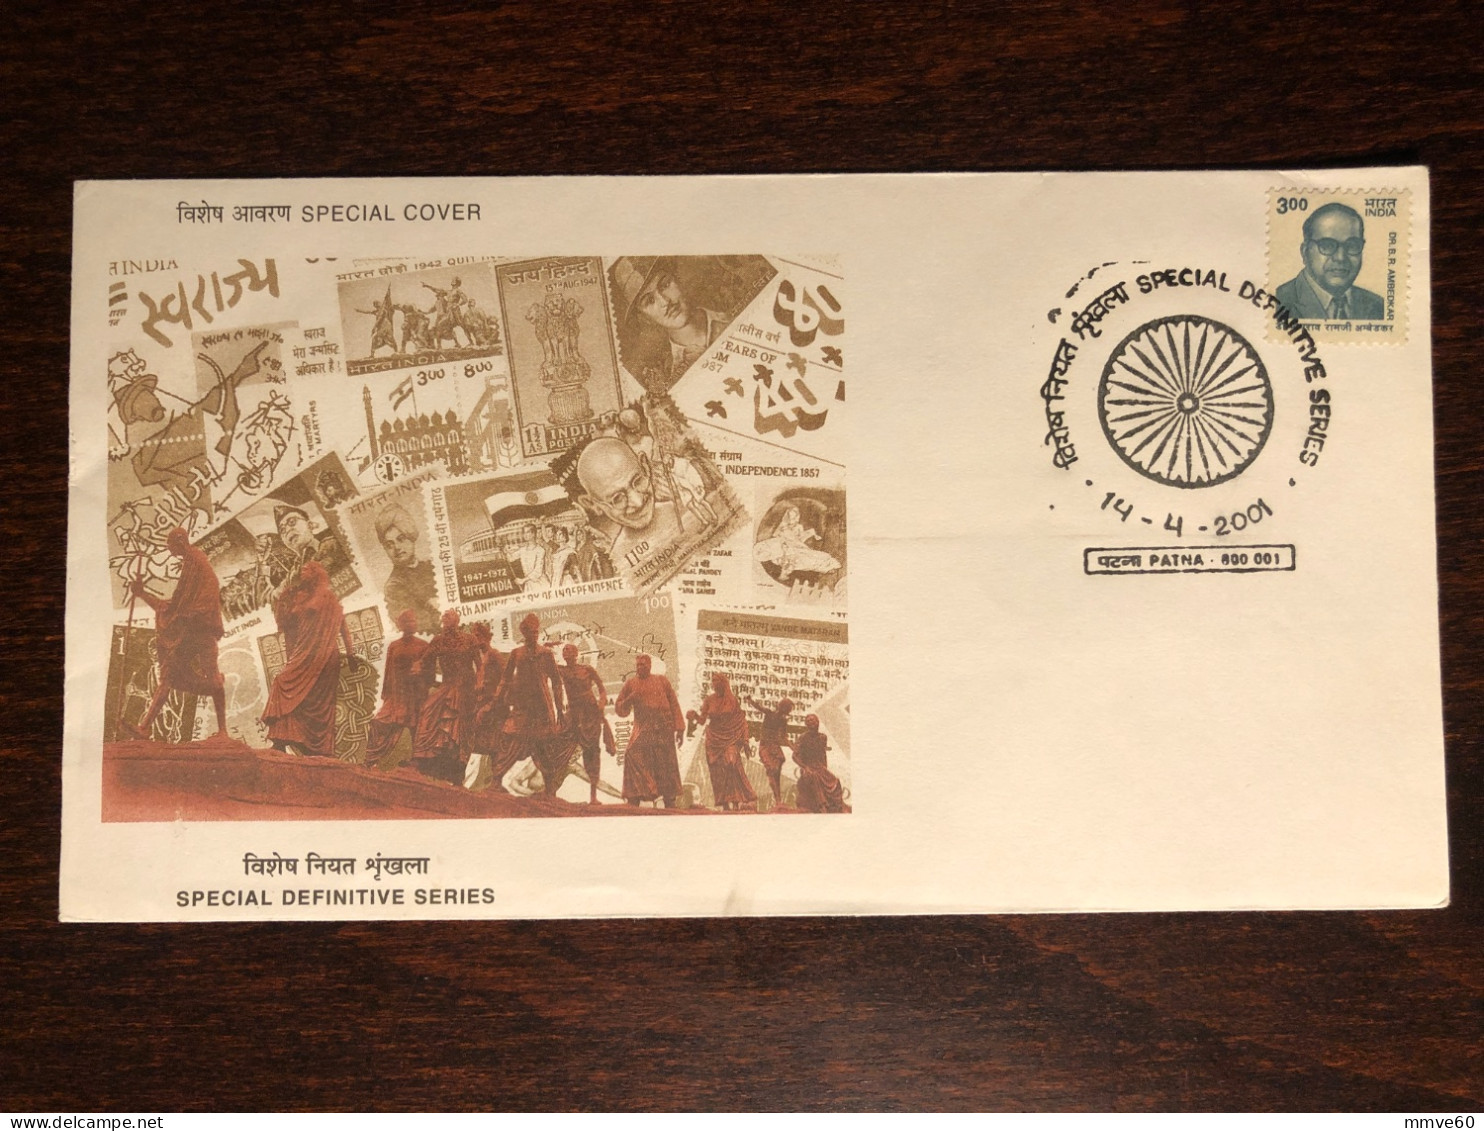 INDIA FDC COVER 2001 YEAR DOCTOR PATNA  HEALTH MEDICINE STAMPS - Briefe U. Dokumente